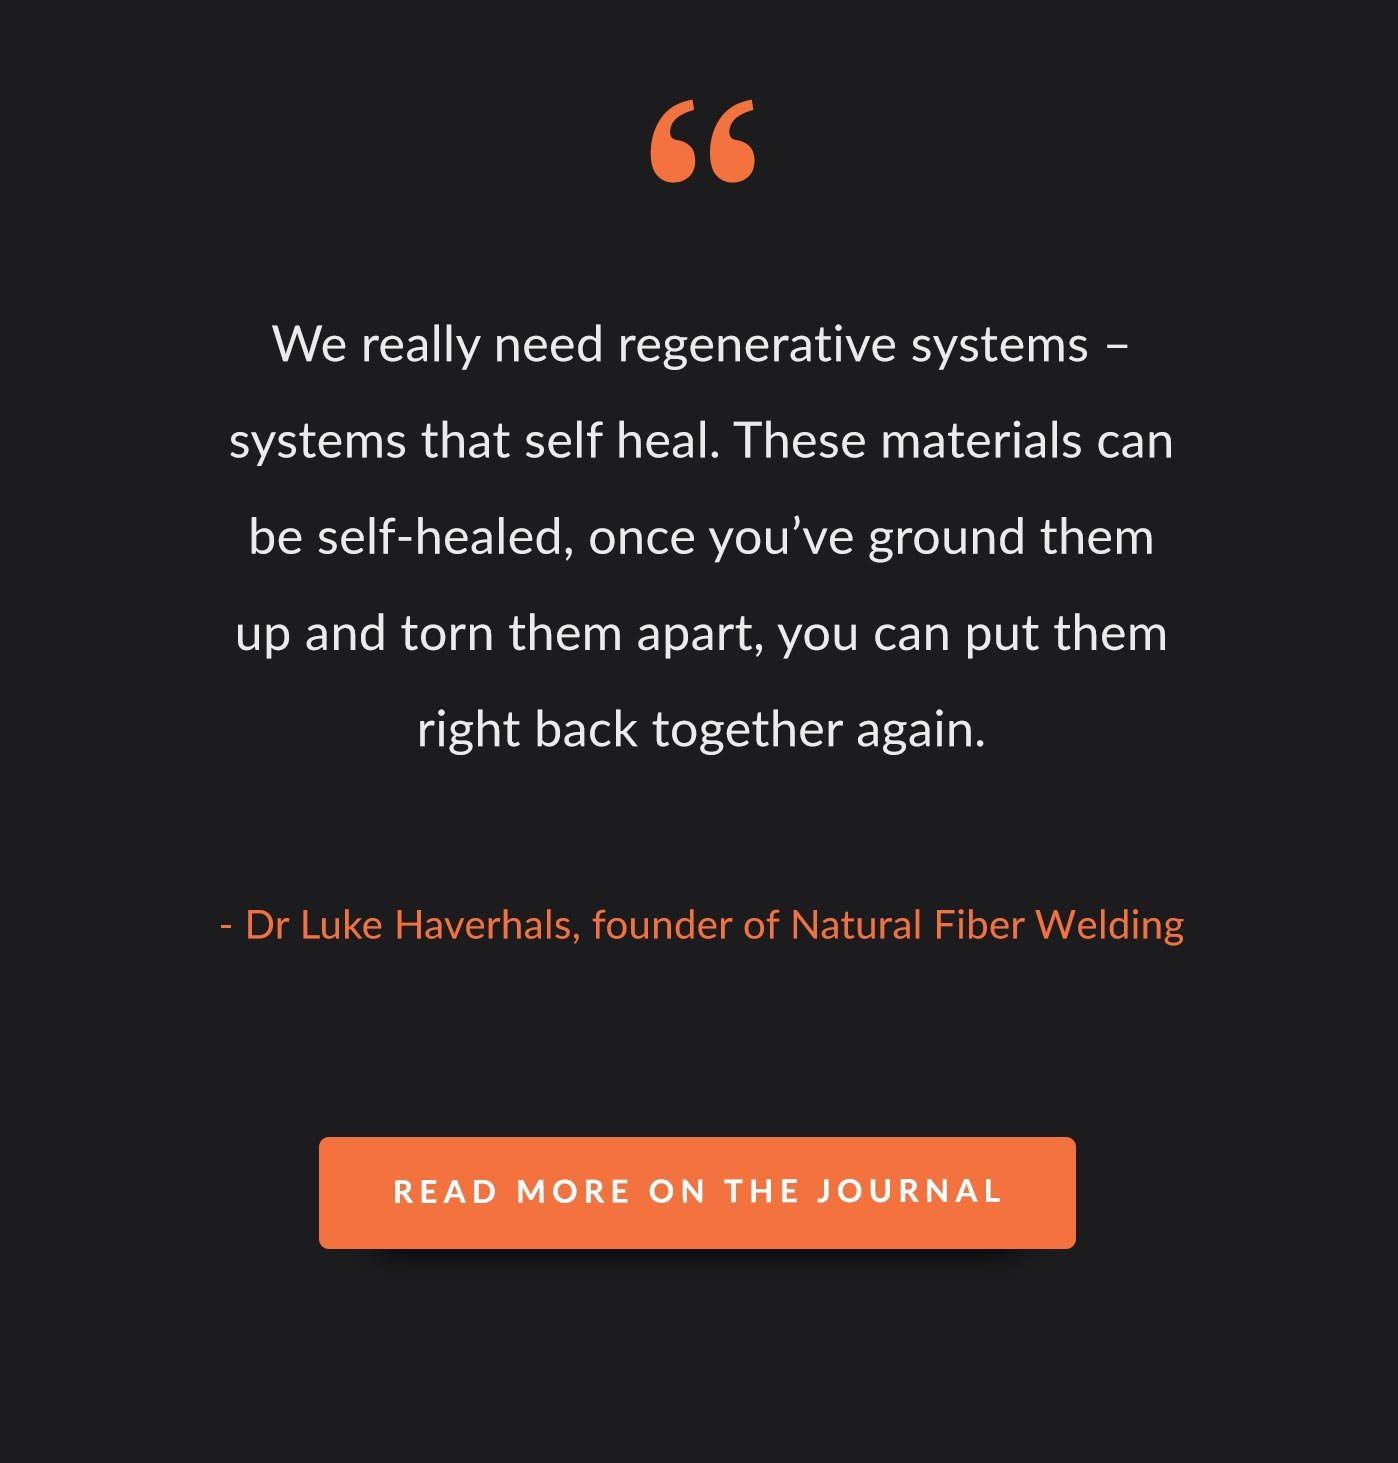  Quote: “We really need regenerative systems"